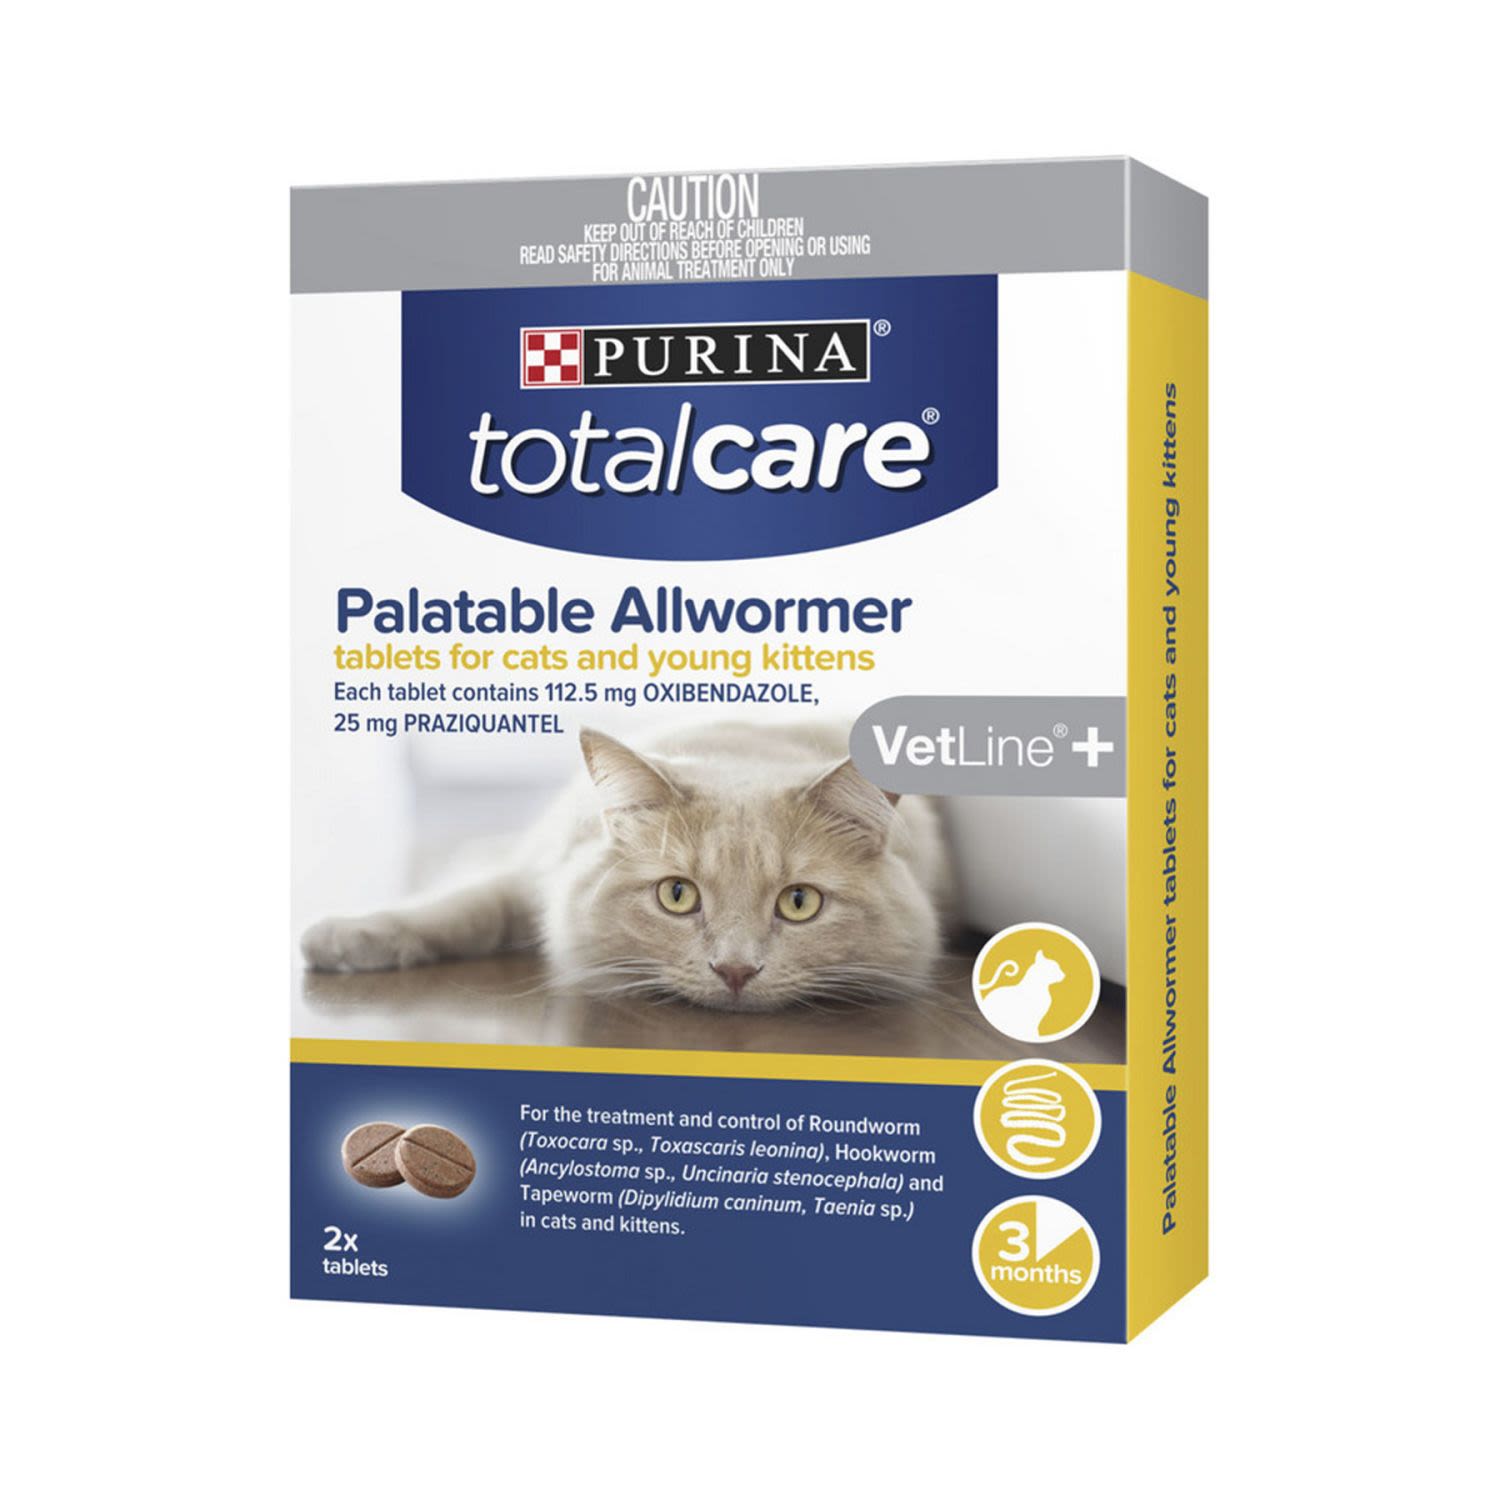 Purina Total Care Palatable Allwormer Cat Kittens Treatment Tablets, 1 Each